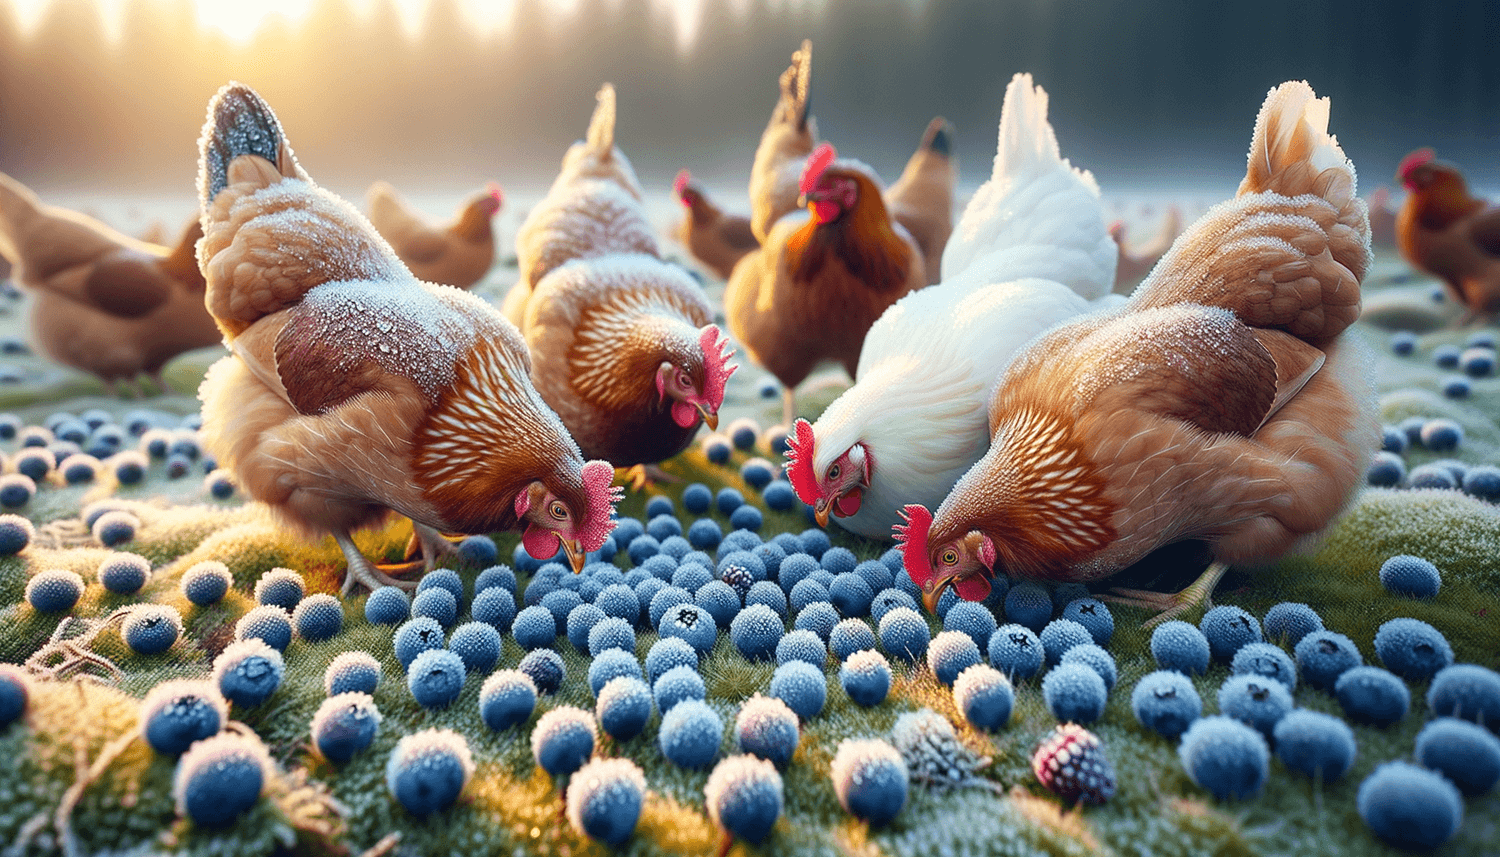 Can Chickens Eat Frozen Blueberries?